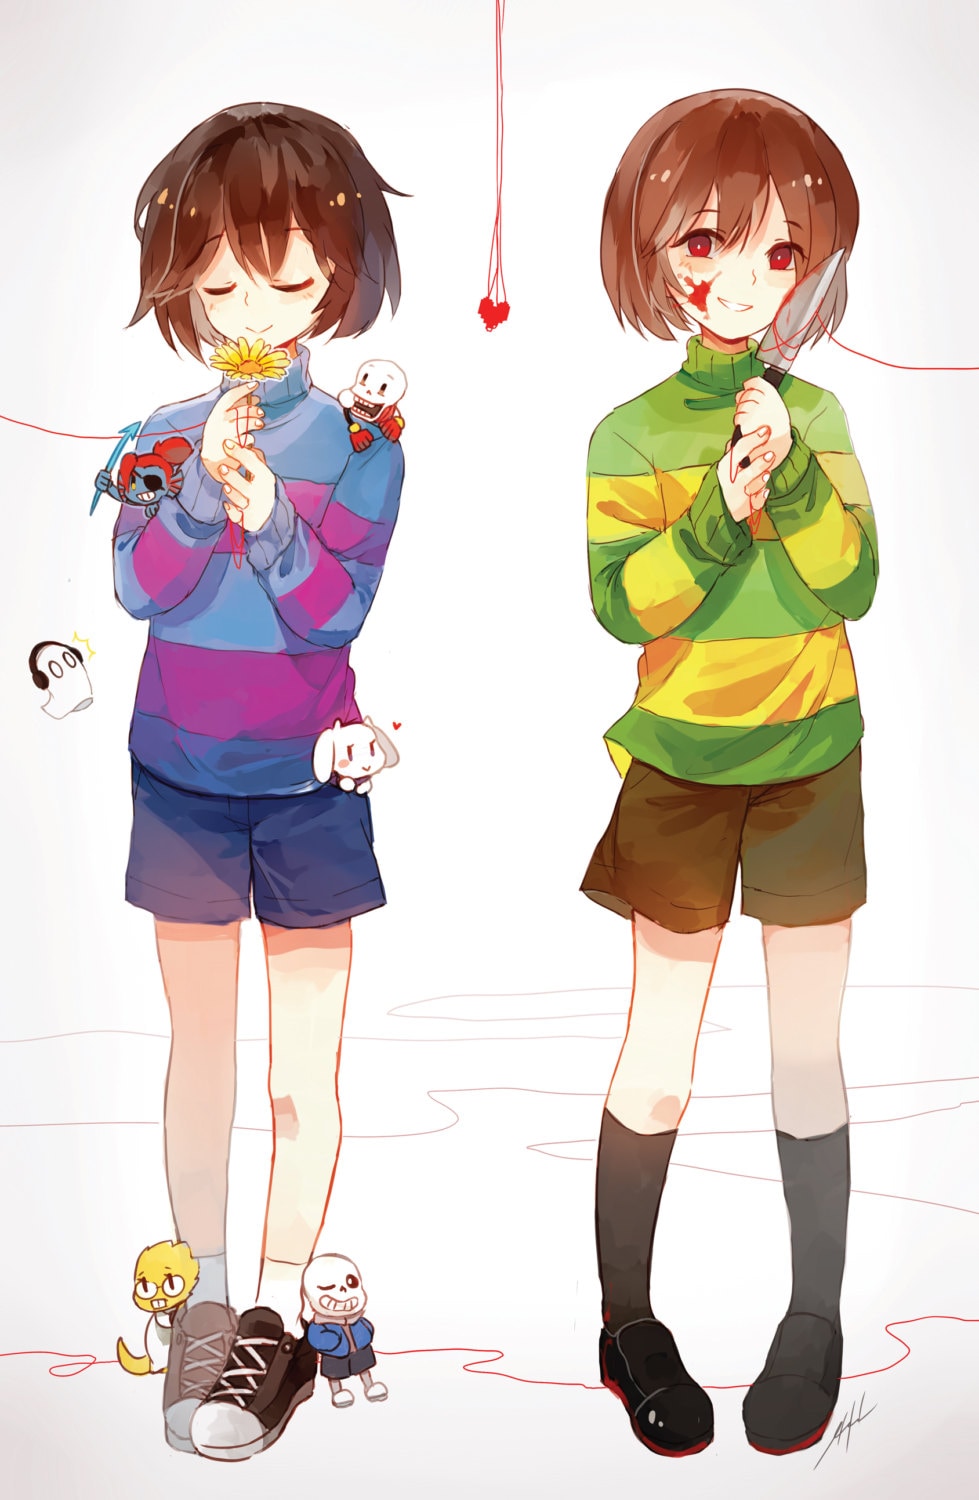 Undertale Frisk And Chara : frisk kris and chara by PinqChains on ...